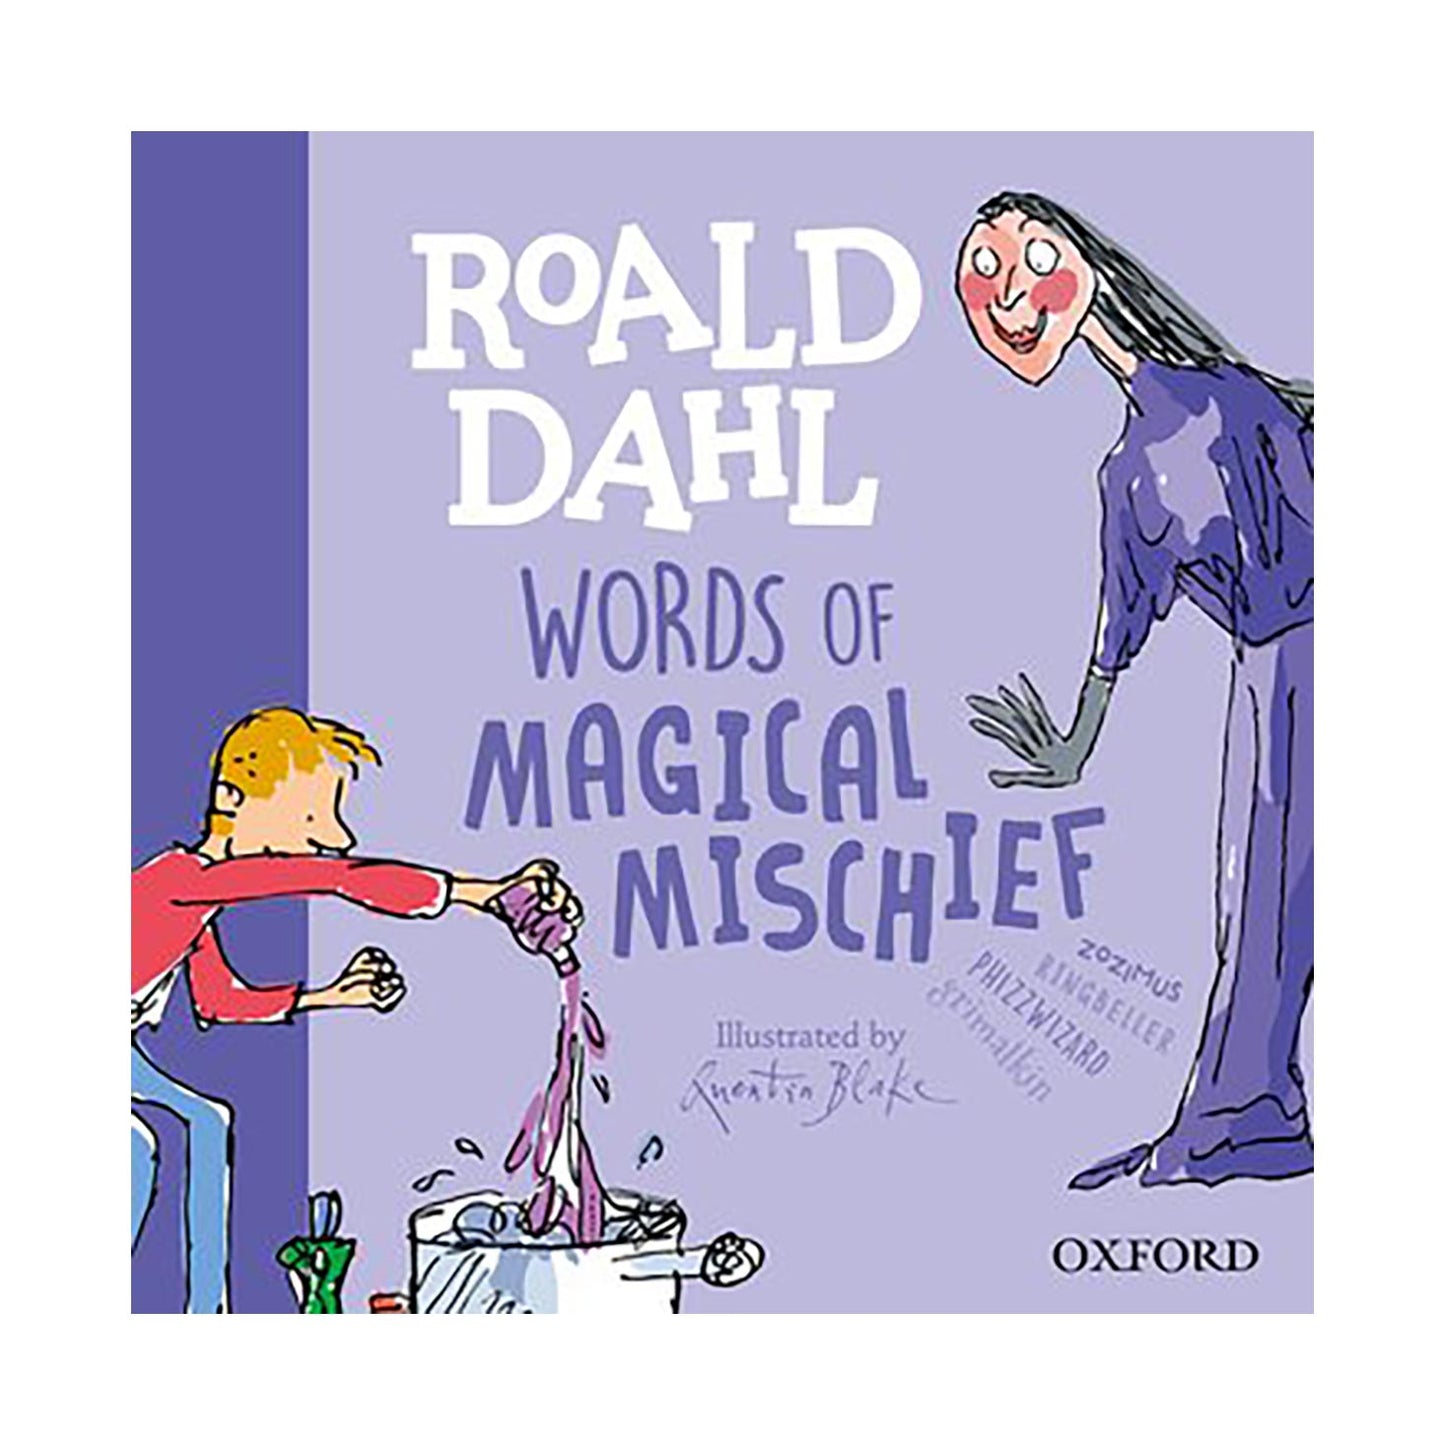 Words of Magical Mischief, based on the stories of Roald Dahl and illustrated by Quentin Blake